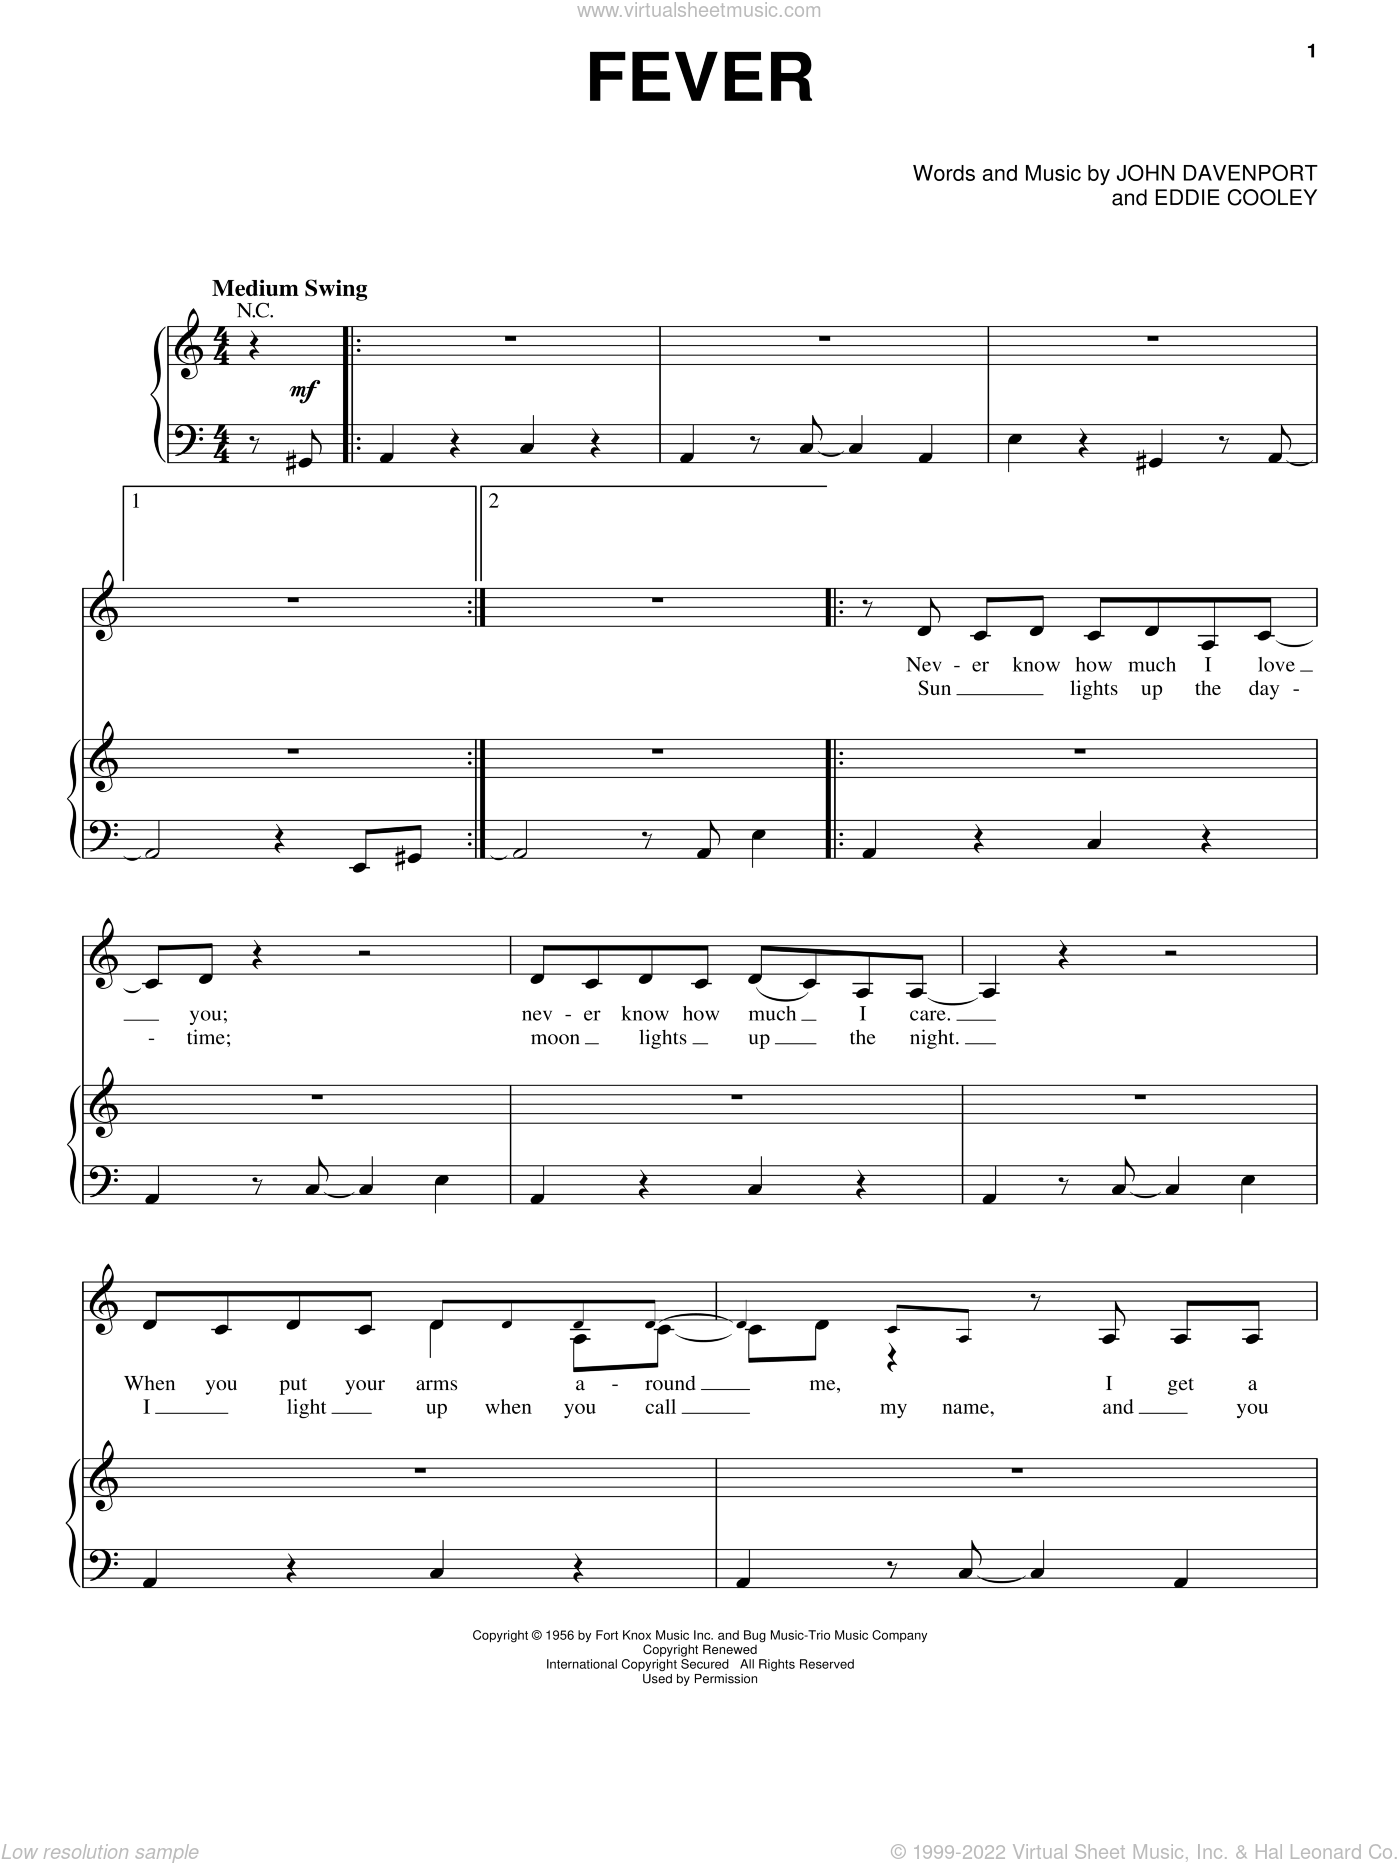 Peggy Lee: Fever sheet music for voice and piano (PDF)